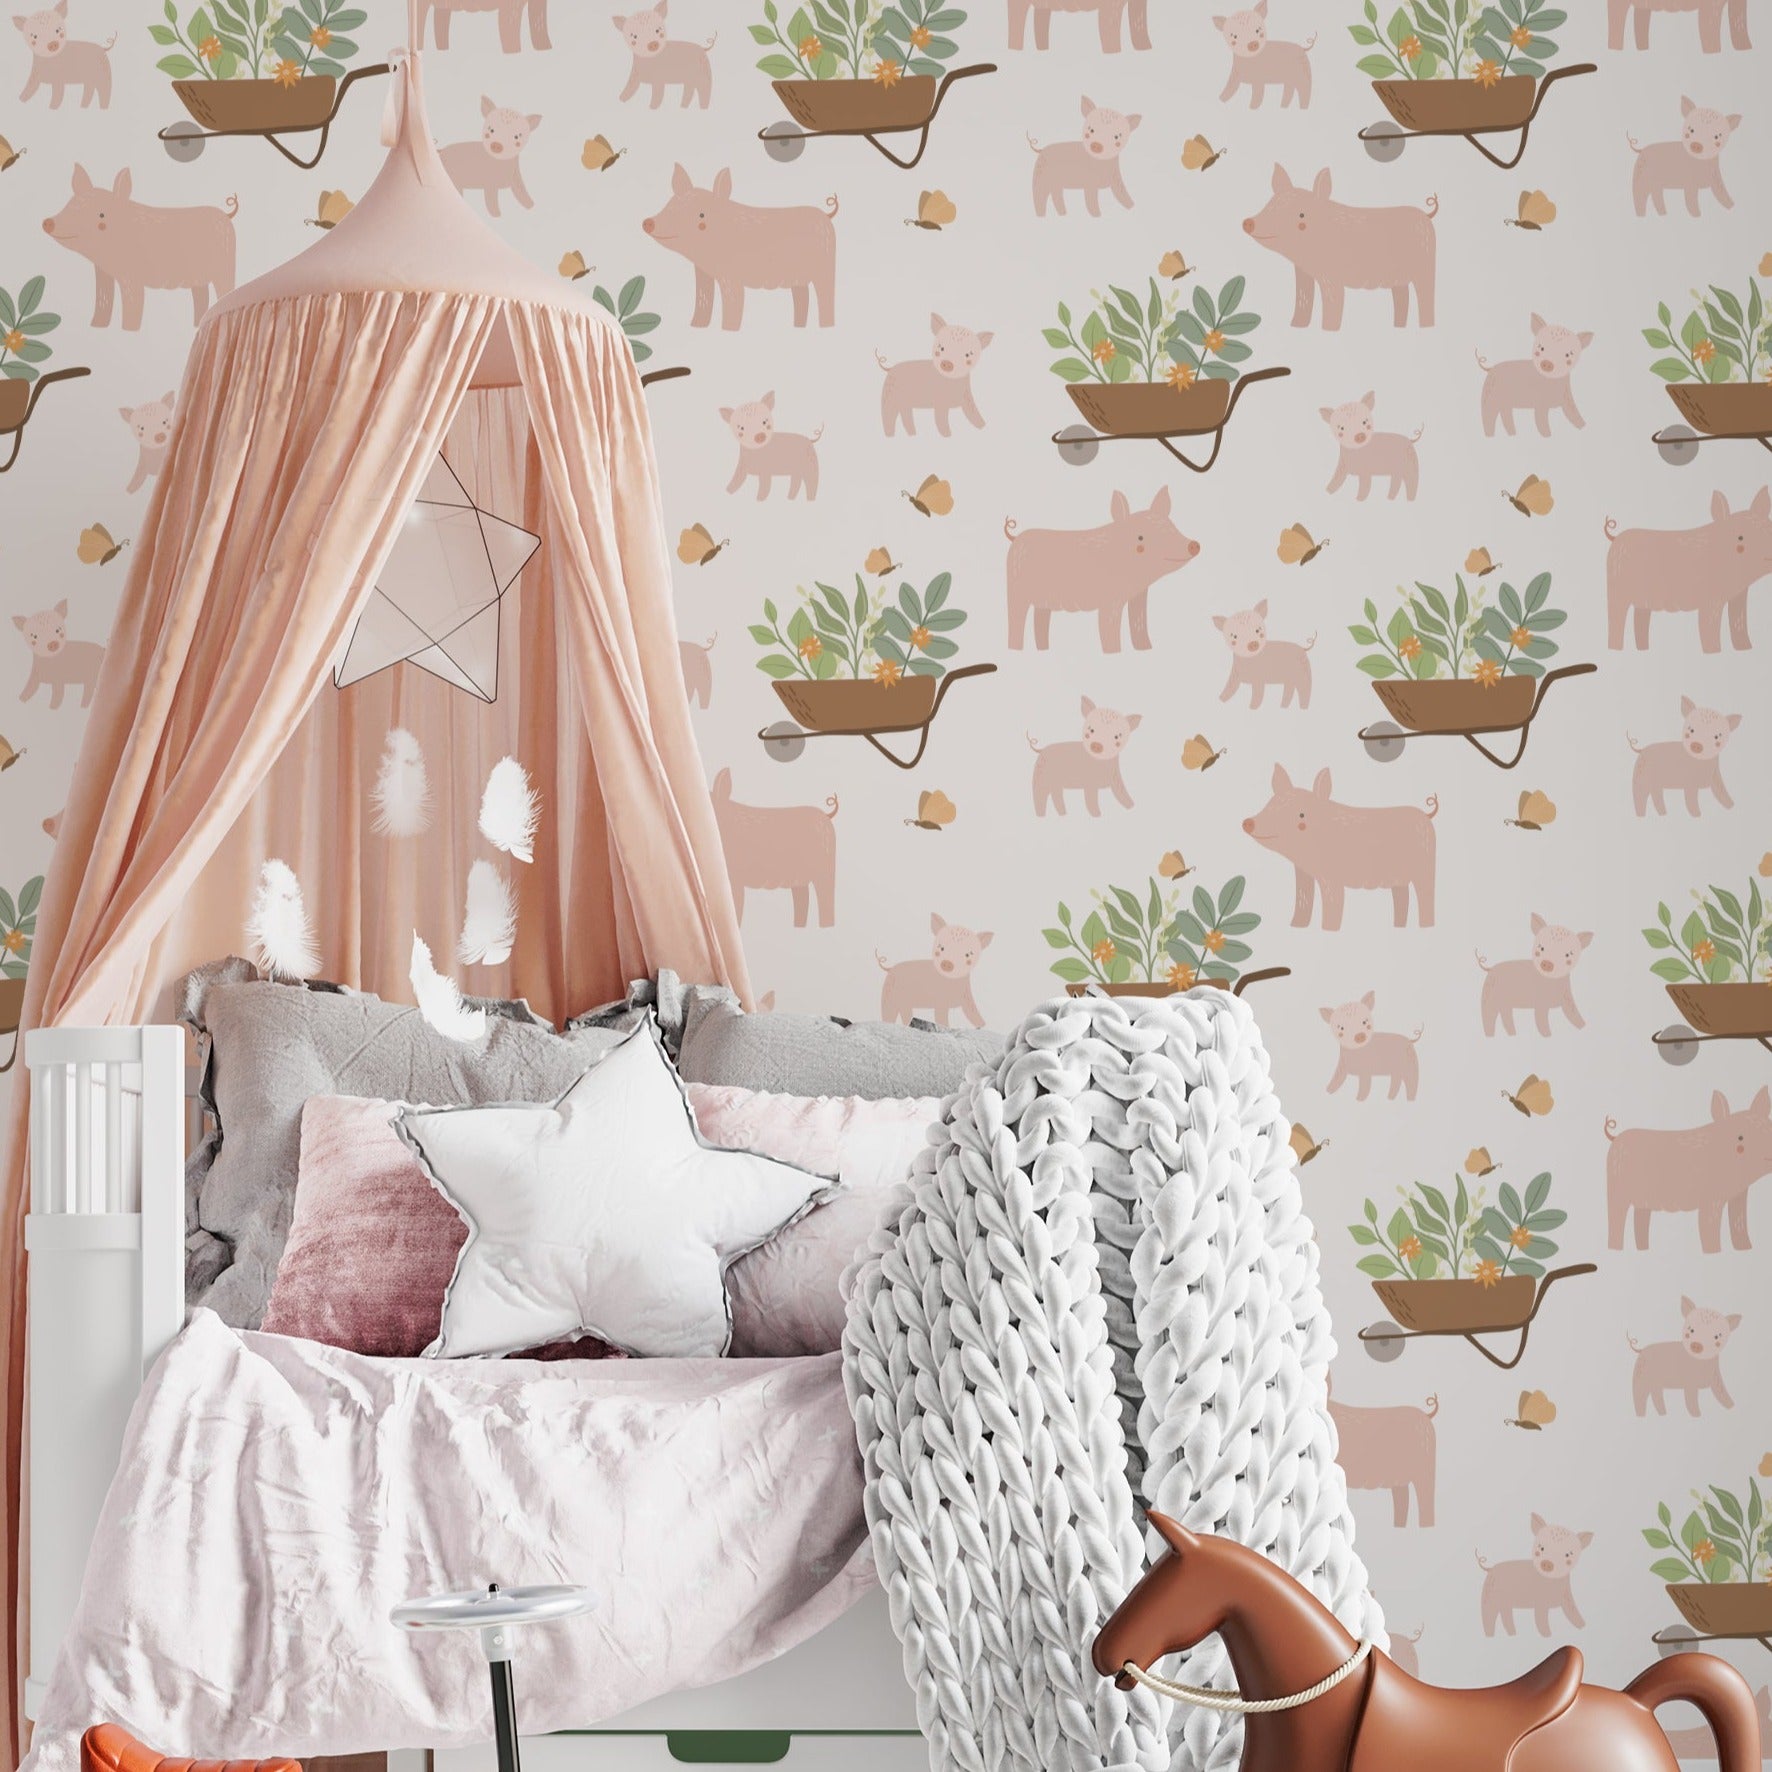 Close-up of Spring Farm Wallpaper in a children's room with pig and wheelbarrow designs.